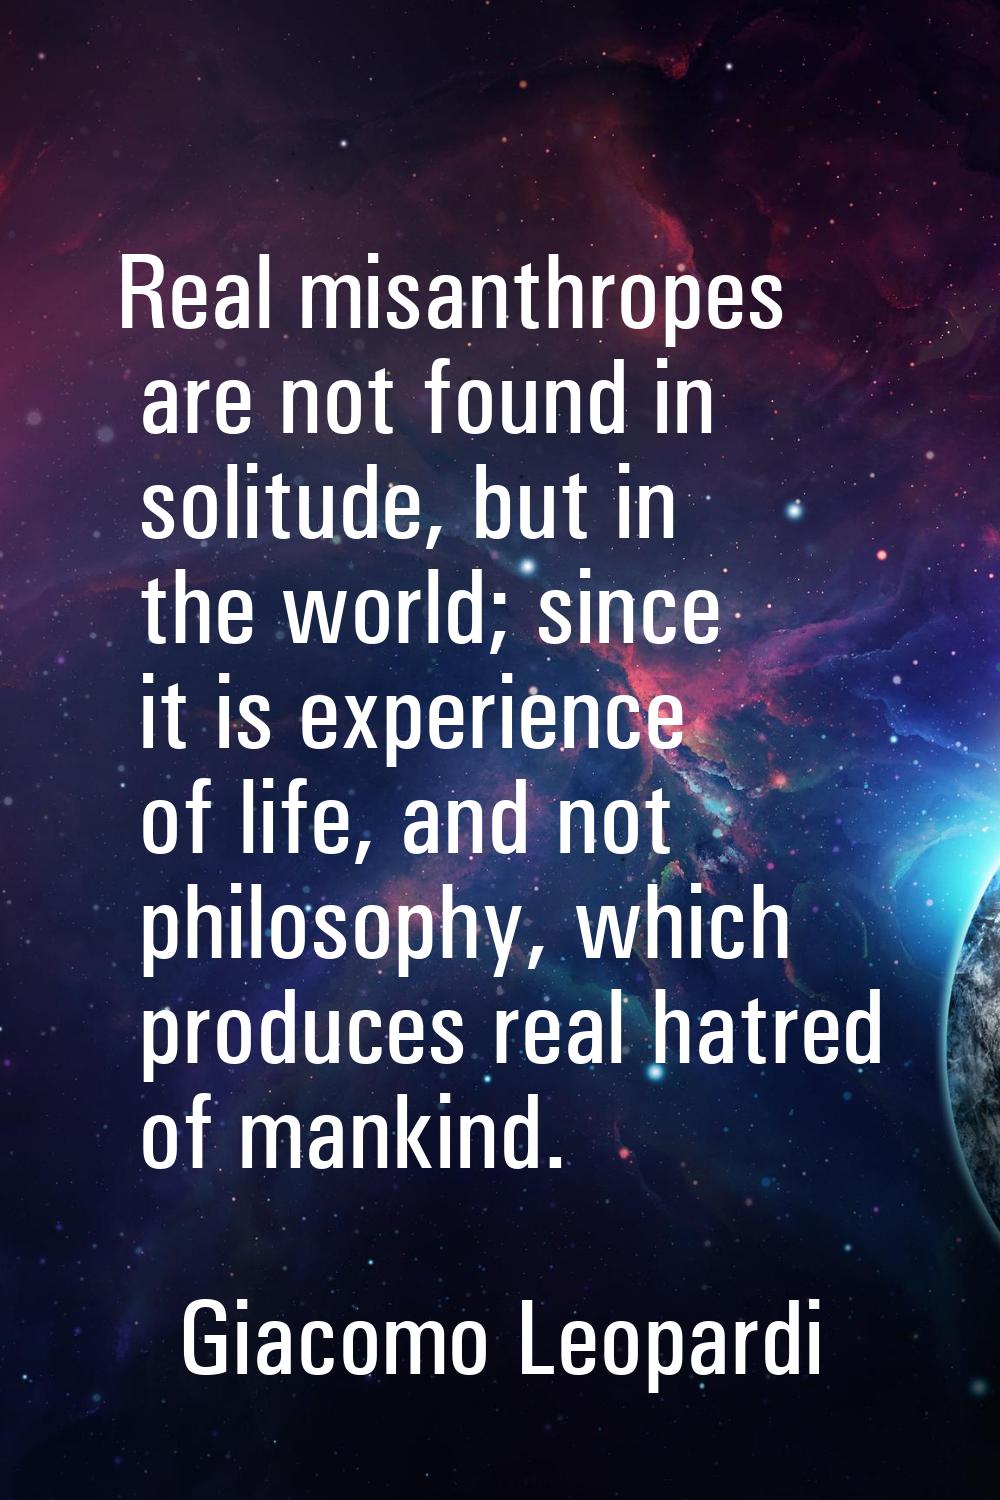 Real misanthropes are not found in solitude, but in the world; since it is experience of life, and 